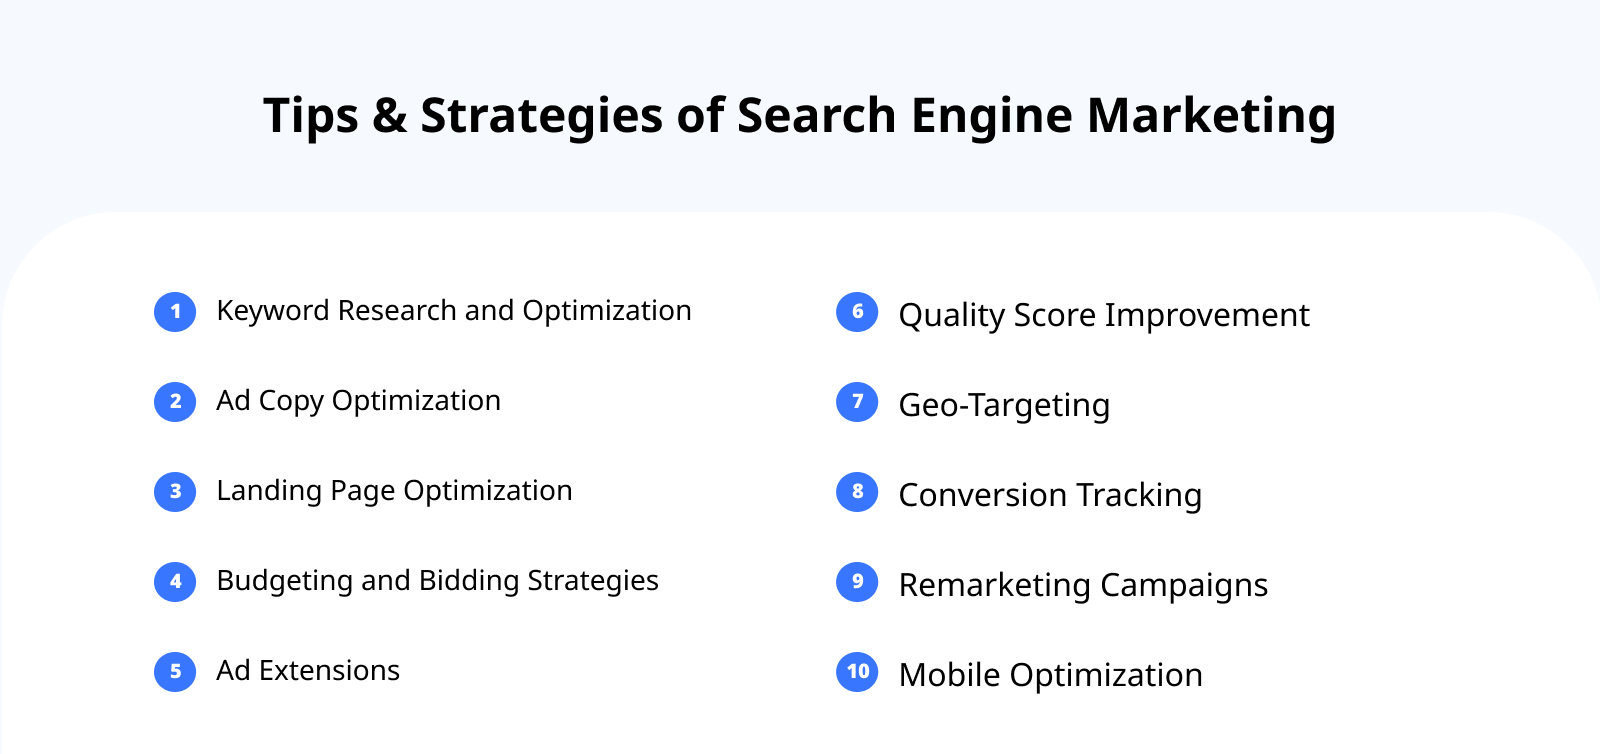 Tips & Strategies of Search Engine Marketing